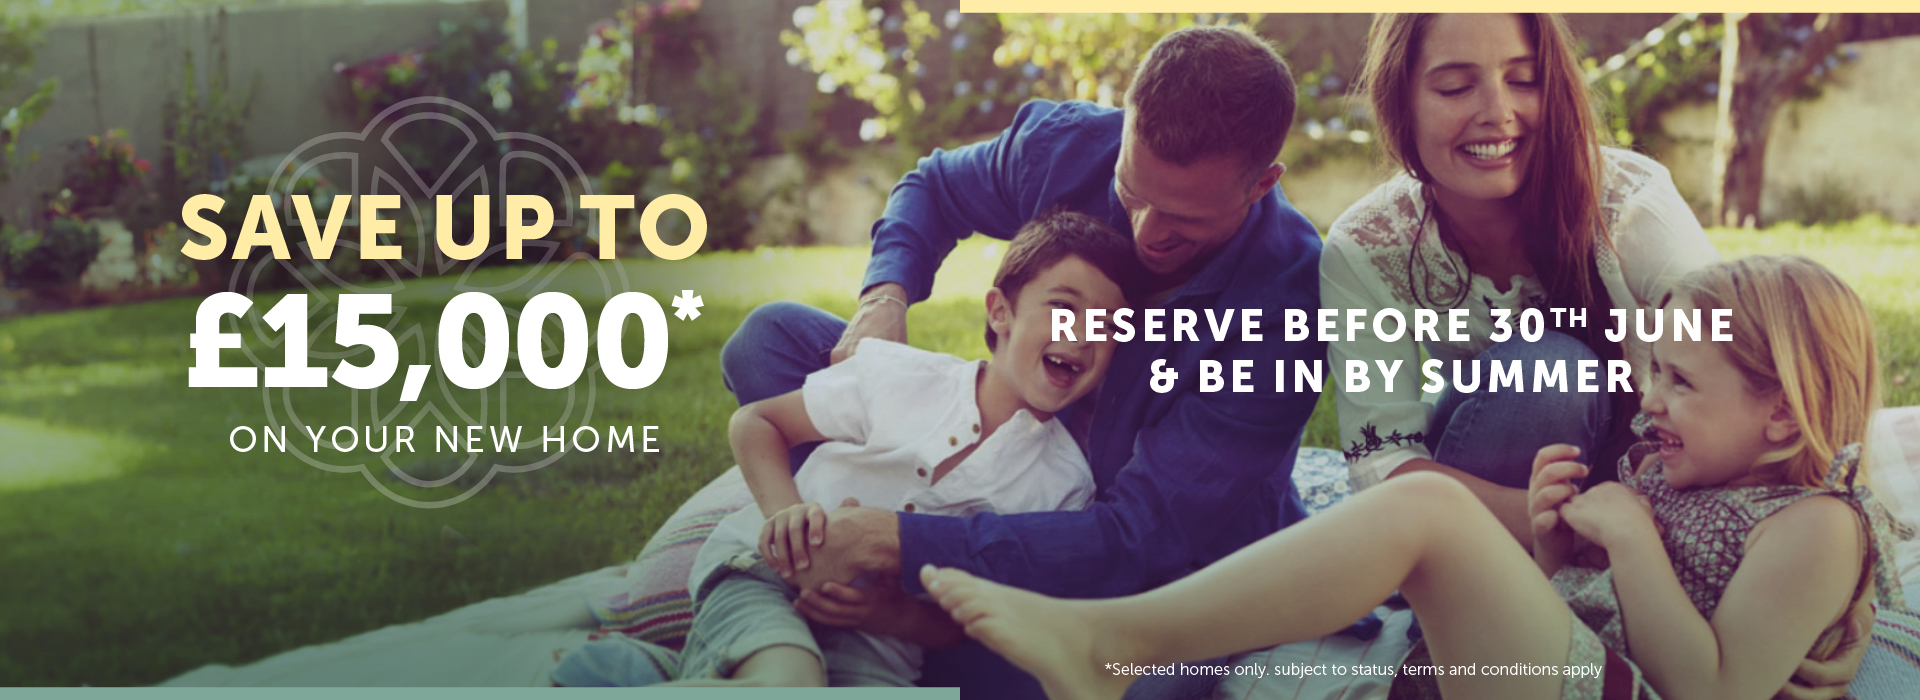 Save up to £15,000* on your new home when you reserve by 30th June 2023